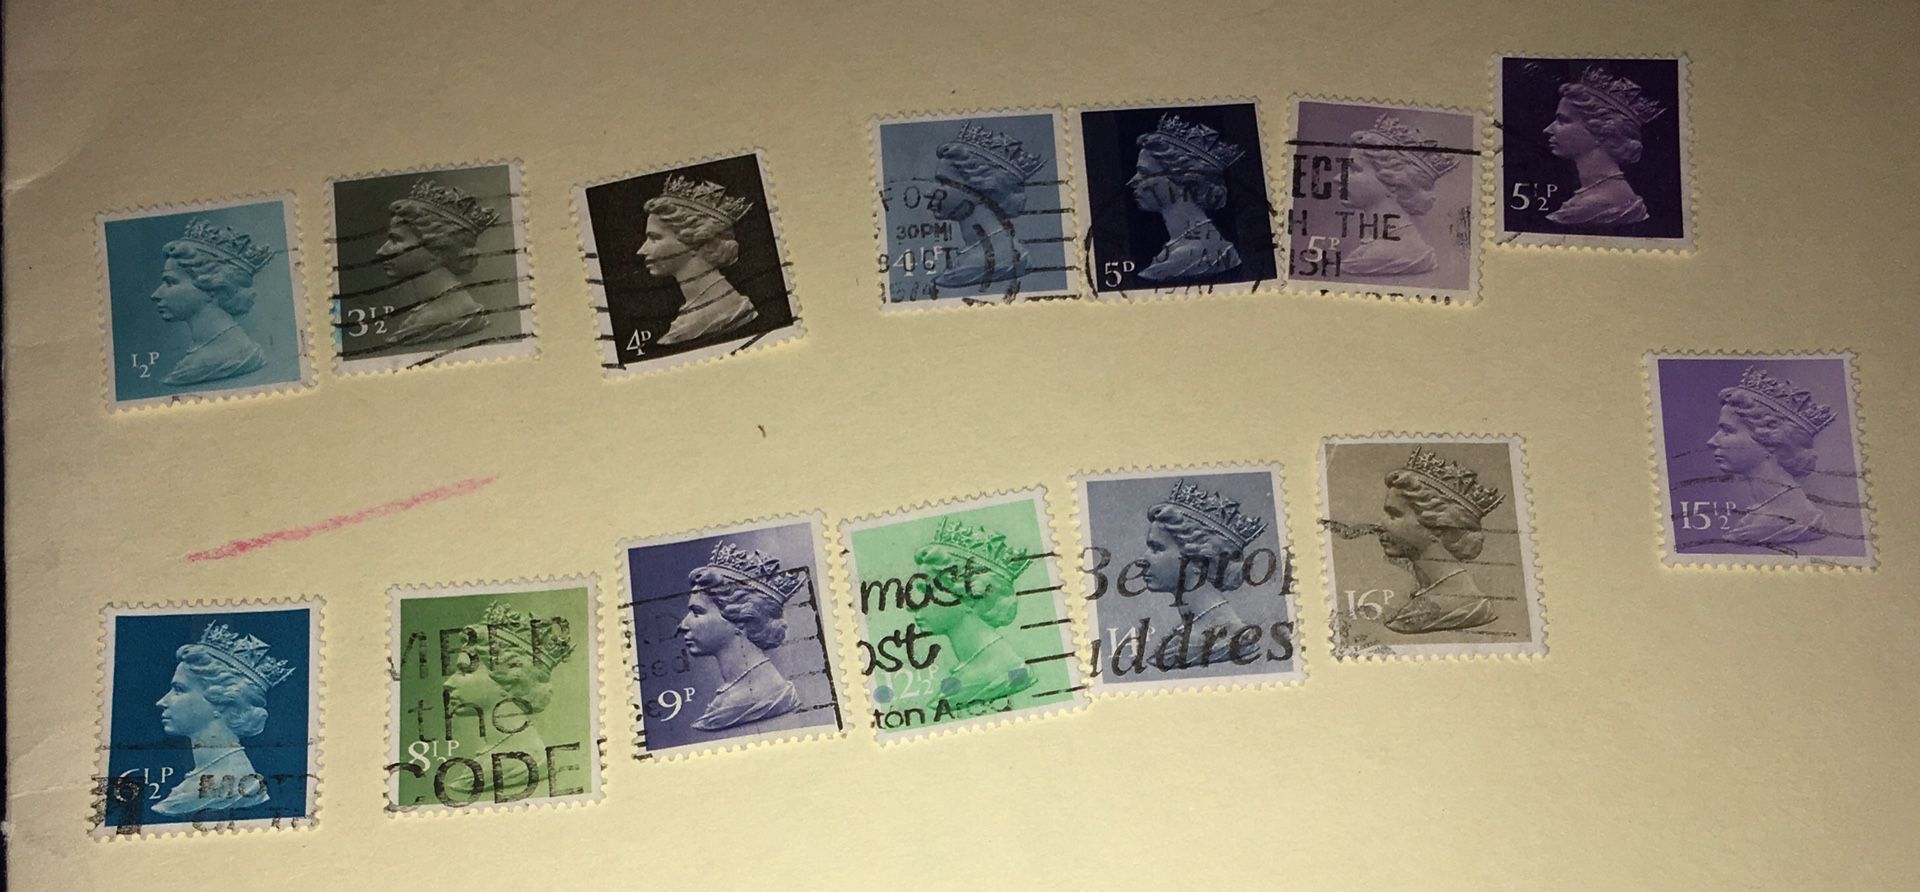 Mixed lot of 14 used stamps of Great Britain. Best offers considered